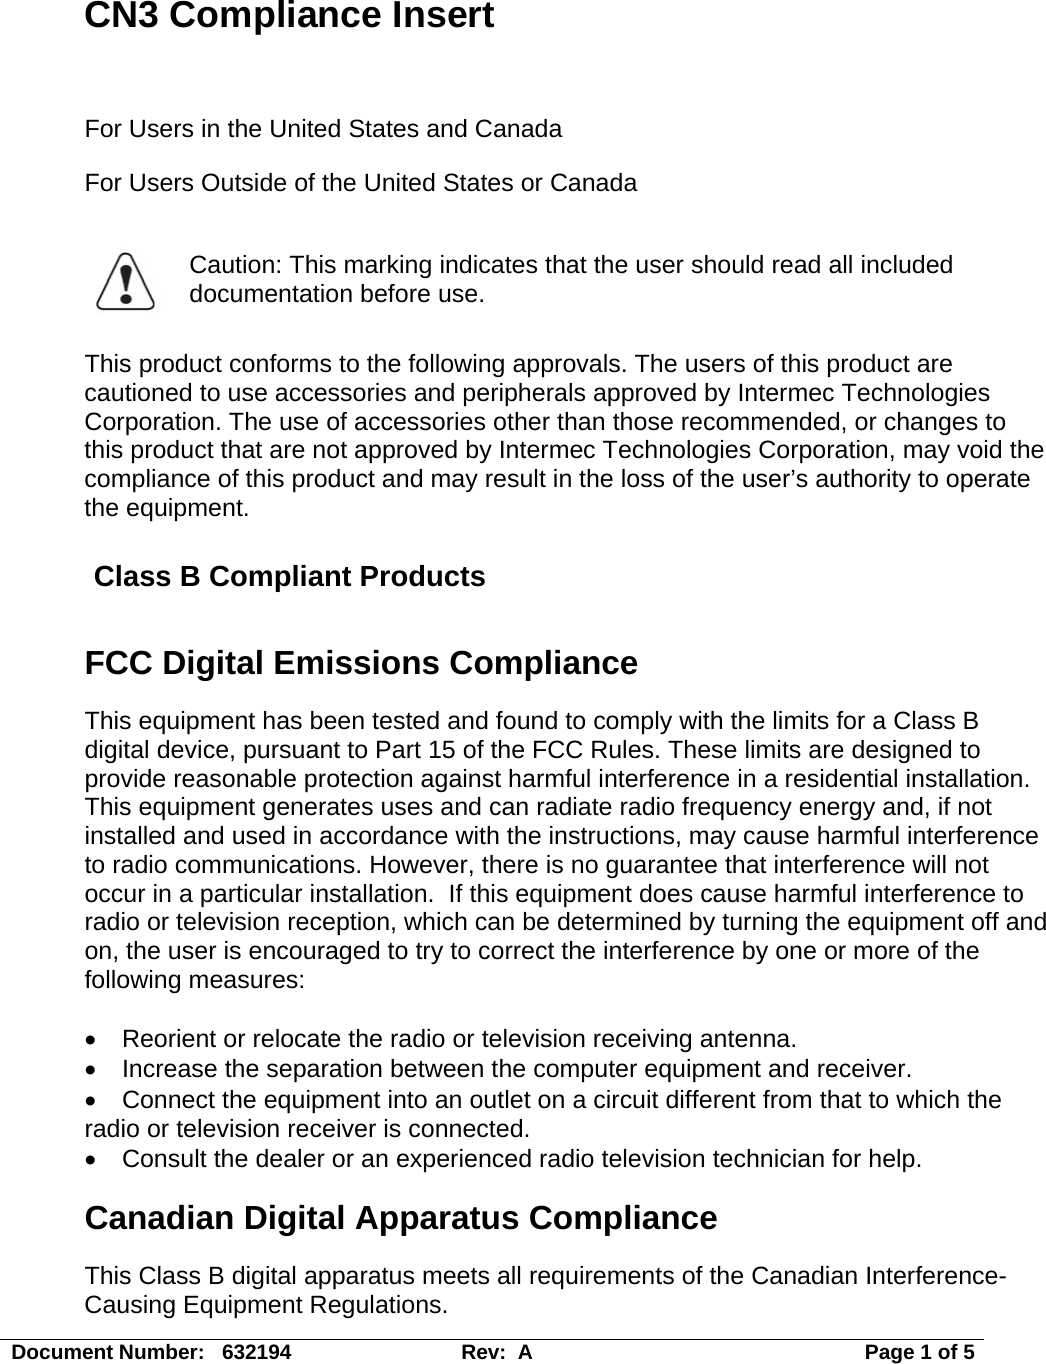 CN3 Compliance Insert  For Users in the United States and Canada For Users Outside of the United States or Canada   Caution: This marking indicates that the user should read all included documentation before use.  This product conforms to the following approvals. The users of this product are cautioned to use accessories and peripherals approved by Intermec Technologies Corporation. The use of accessories other than those recommended, or changes to this product that are not approved by Intermec Technologies Corporation, may void the compliance of this product and may result in the loss of the user’s authority to operate the equipment. Class B Compliant Products FCC Digital Emissions Compliance   This equipment has been tested and found to comply with the limits for a Class B digital device, pursuant to Part 15 of the FCC Rules. These limits are designed to provide reasonable protection against harmful interference in a residential installation.  This equipment generates uses and can radiate radio frequency energy and, if not installed and used in accordance with the instructions, may cause harmful interference to radio communications. However, there is no guarantee that interference will not occur in a particular installation.  If this equipment does cause harmful interference to radio or television reception, which can be determined by turning the equipment off and on, the user is encouraged to try to correct the interference by one or more of the following measures:  •  Reorient or relocate the radio or television receiving antenna. •  Increase the separation between the computer equipment and receiver. •  Connect the equipment into an outlet on a circuit different from that to which the radio or television receiver is connected. •  Consult the dealer or an experienced radio television technician for help. Canadian Digital Apparatus Compliance This Class B digital apparatus meets all requirements of the Canadian Interference-Causing Equipment Regulations.  Document Number:   632194  Rev:  A   Page 1 of 5 